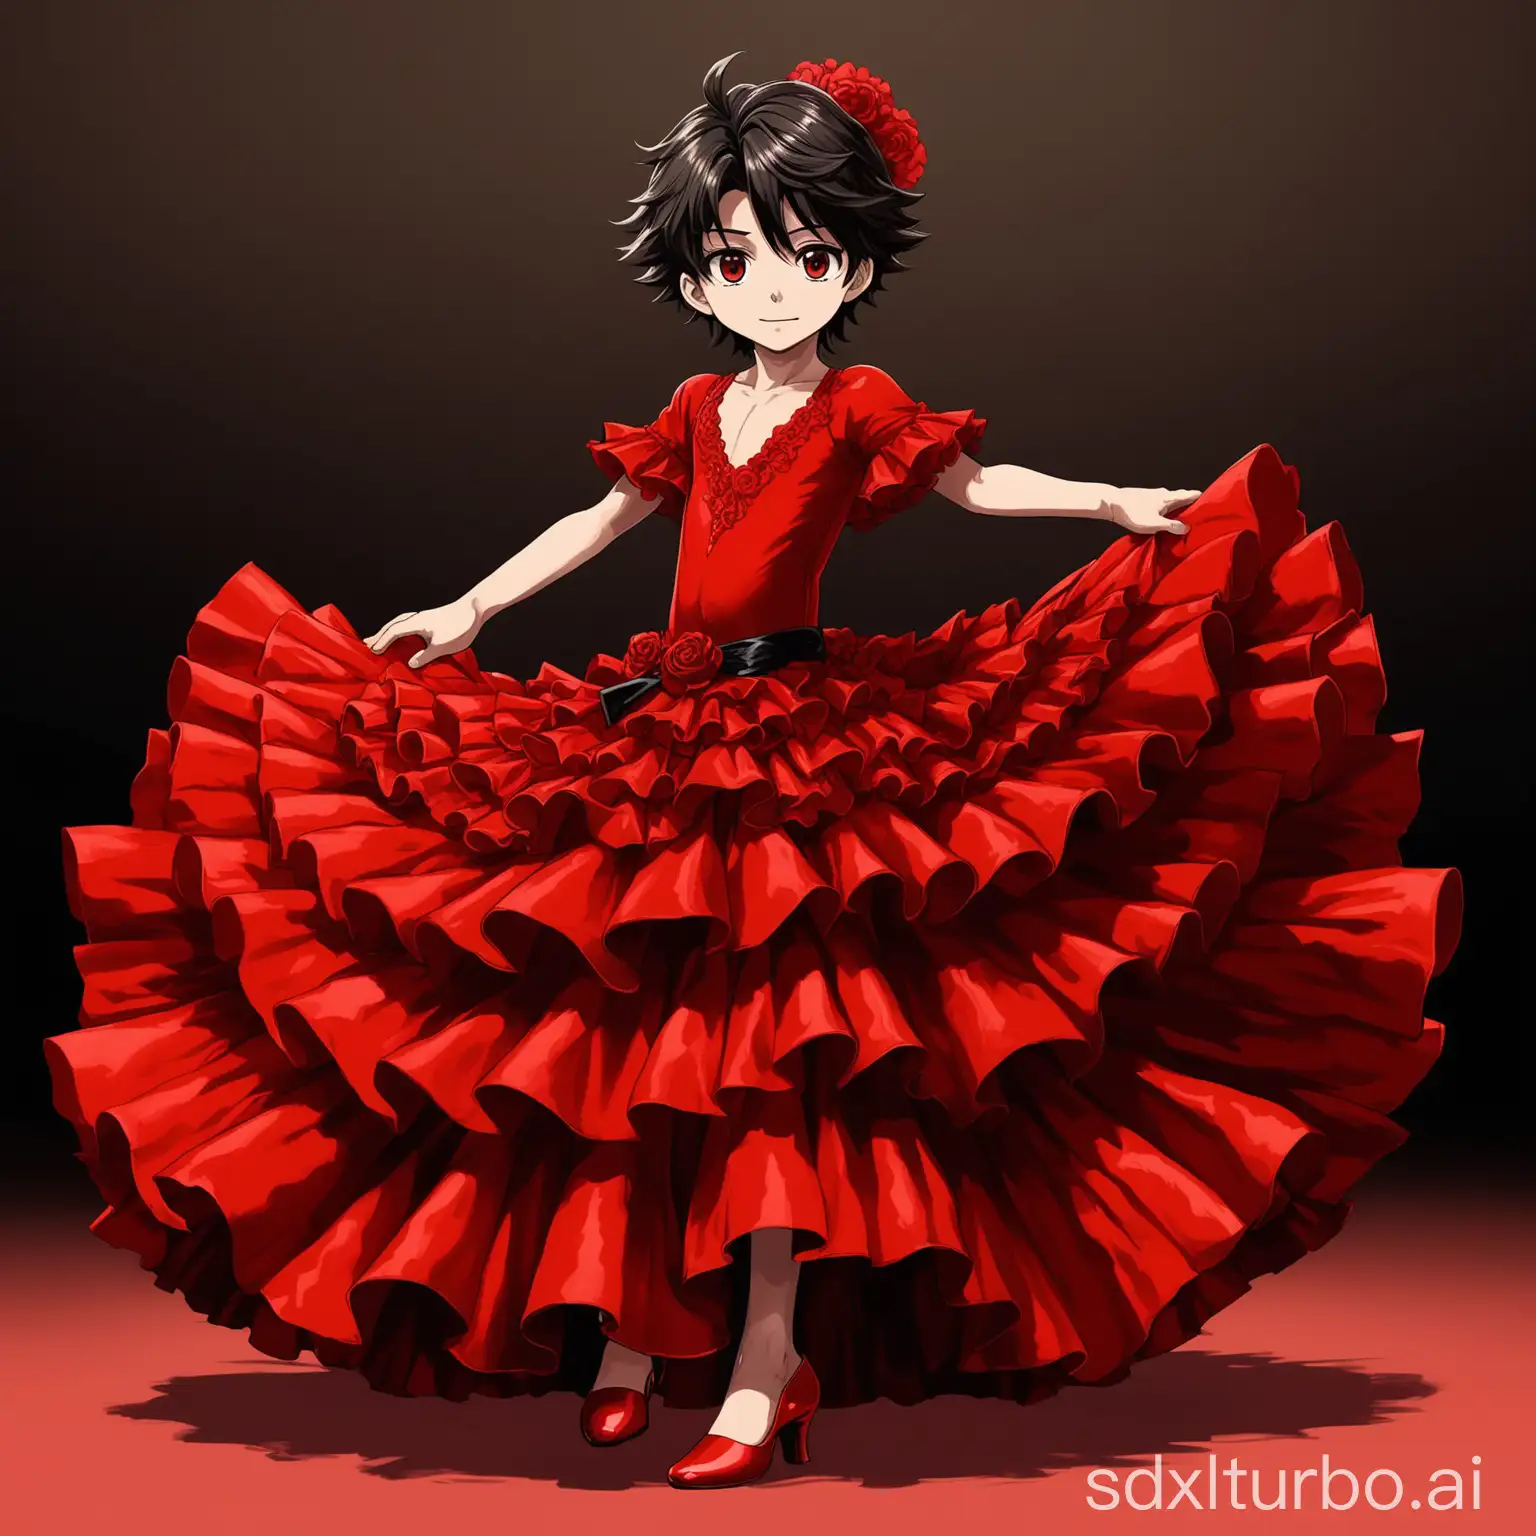 6 year old anime boy in a red floor length poofy flamenco dress with heels